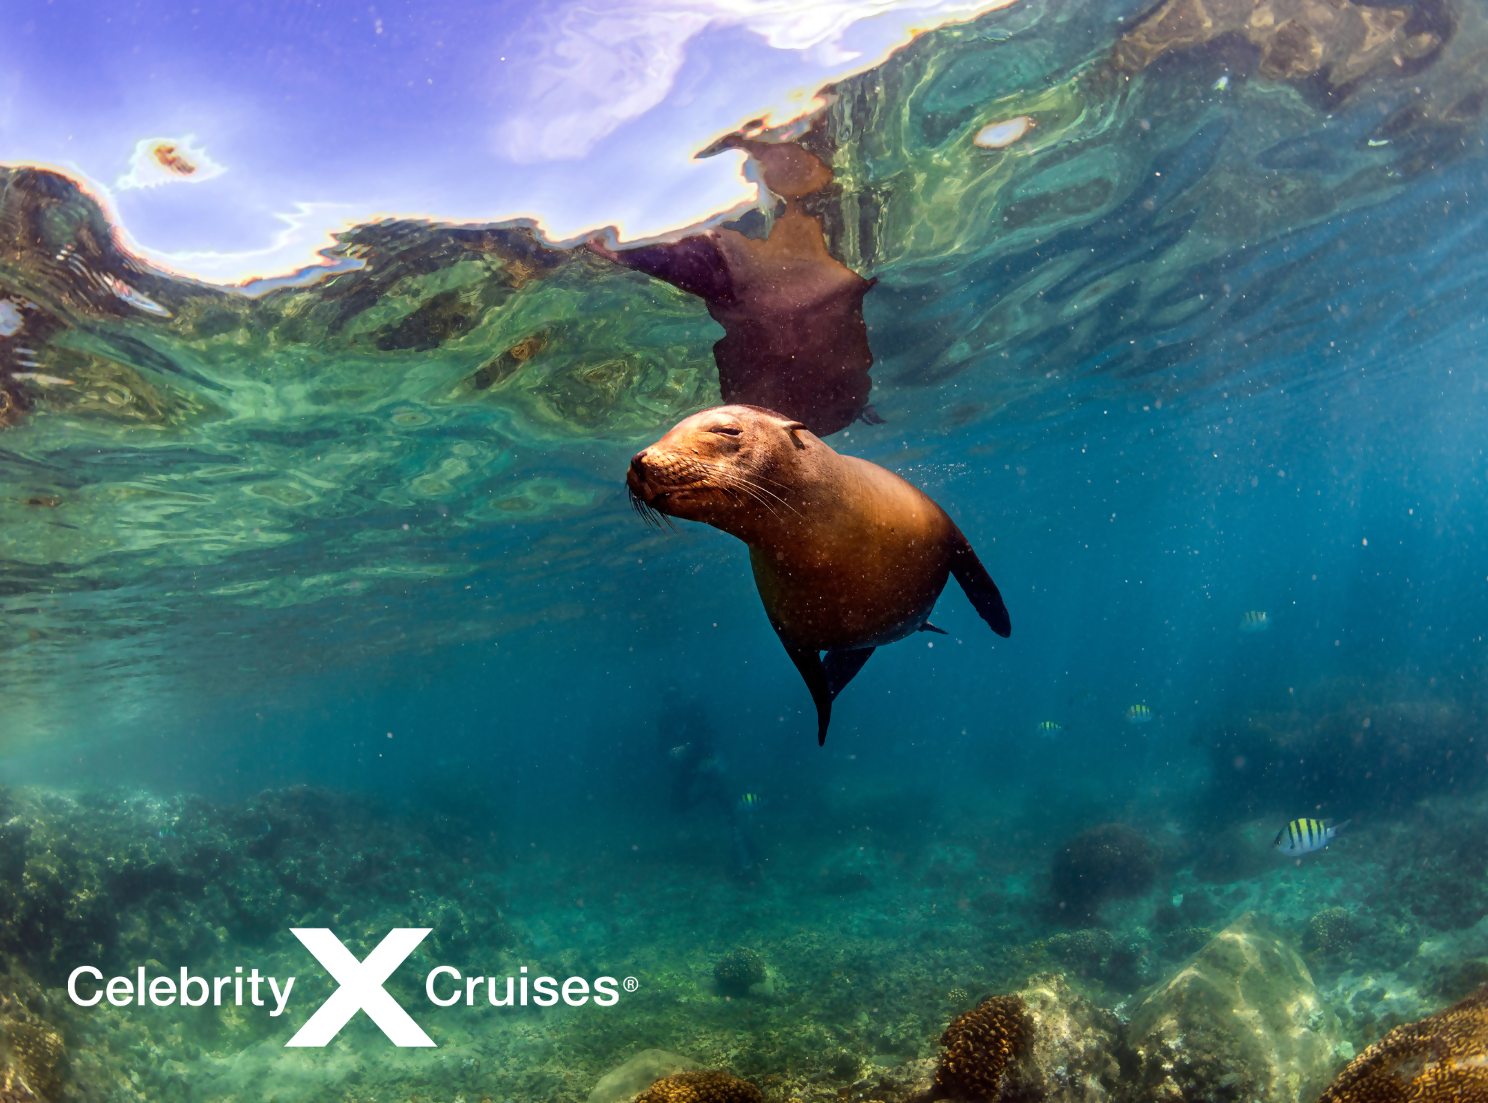 Celebrity Cruises Galapagos Adventure at 20% Off!